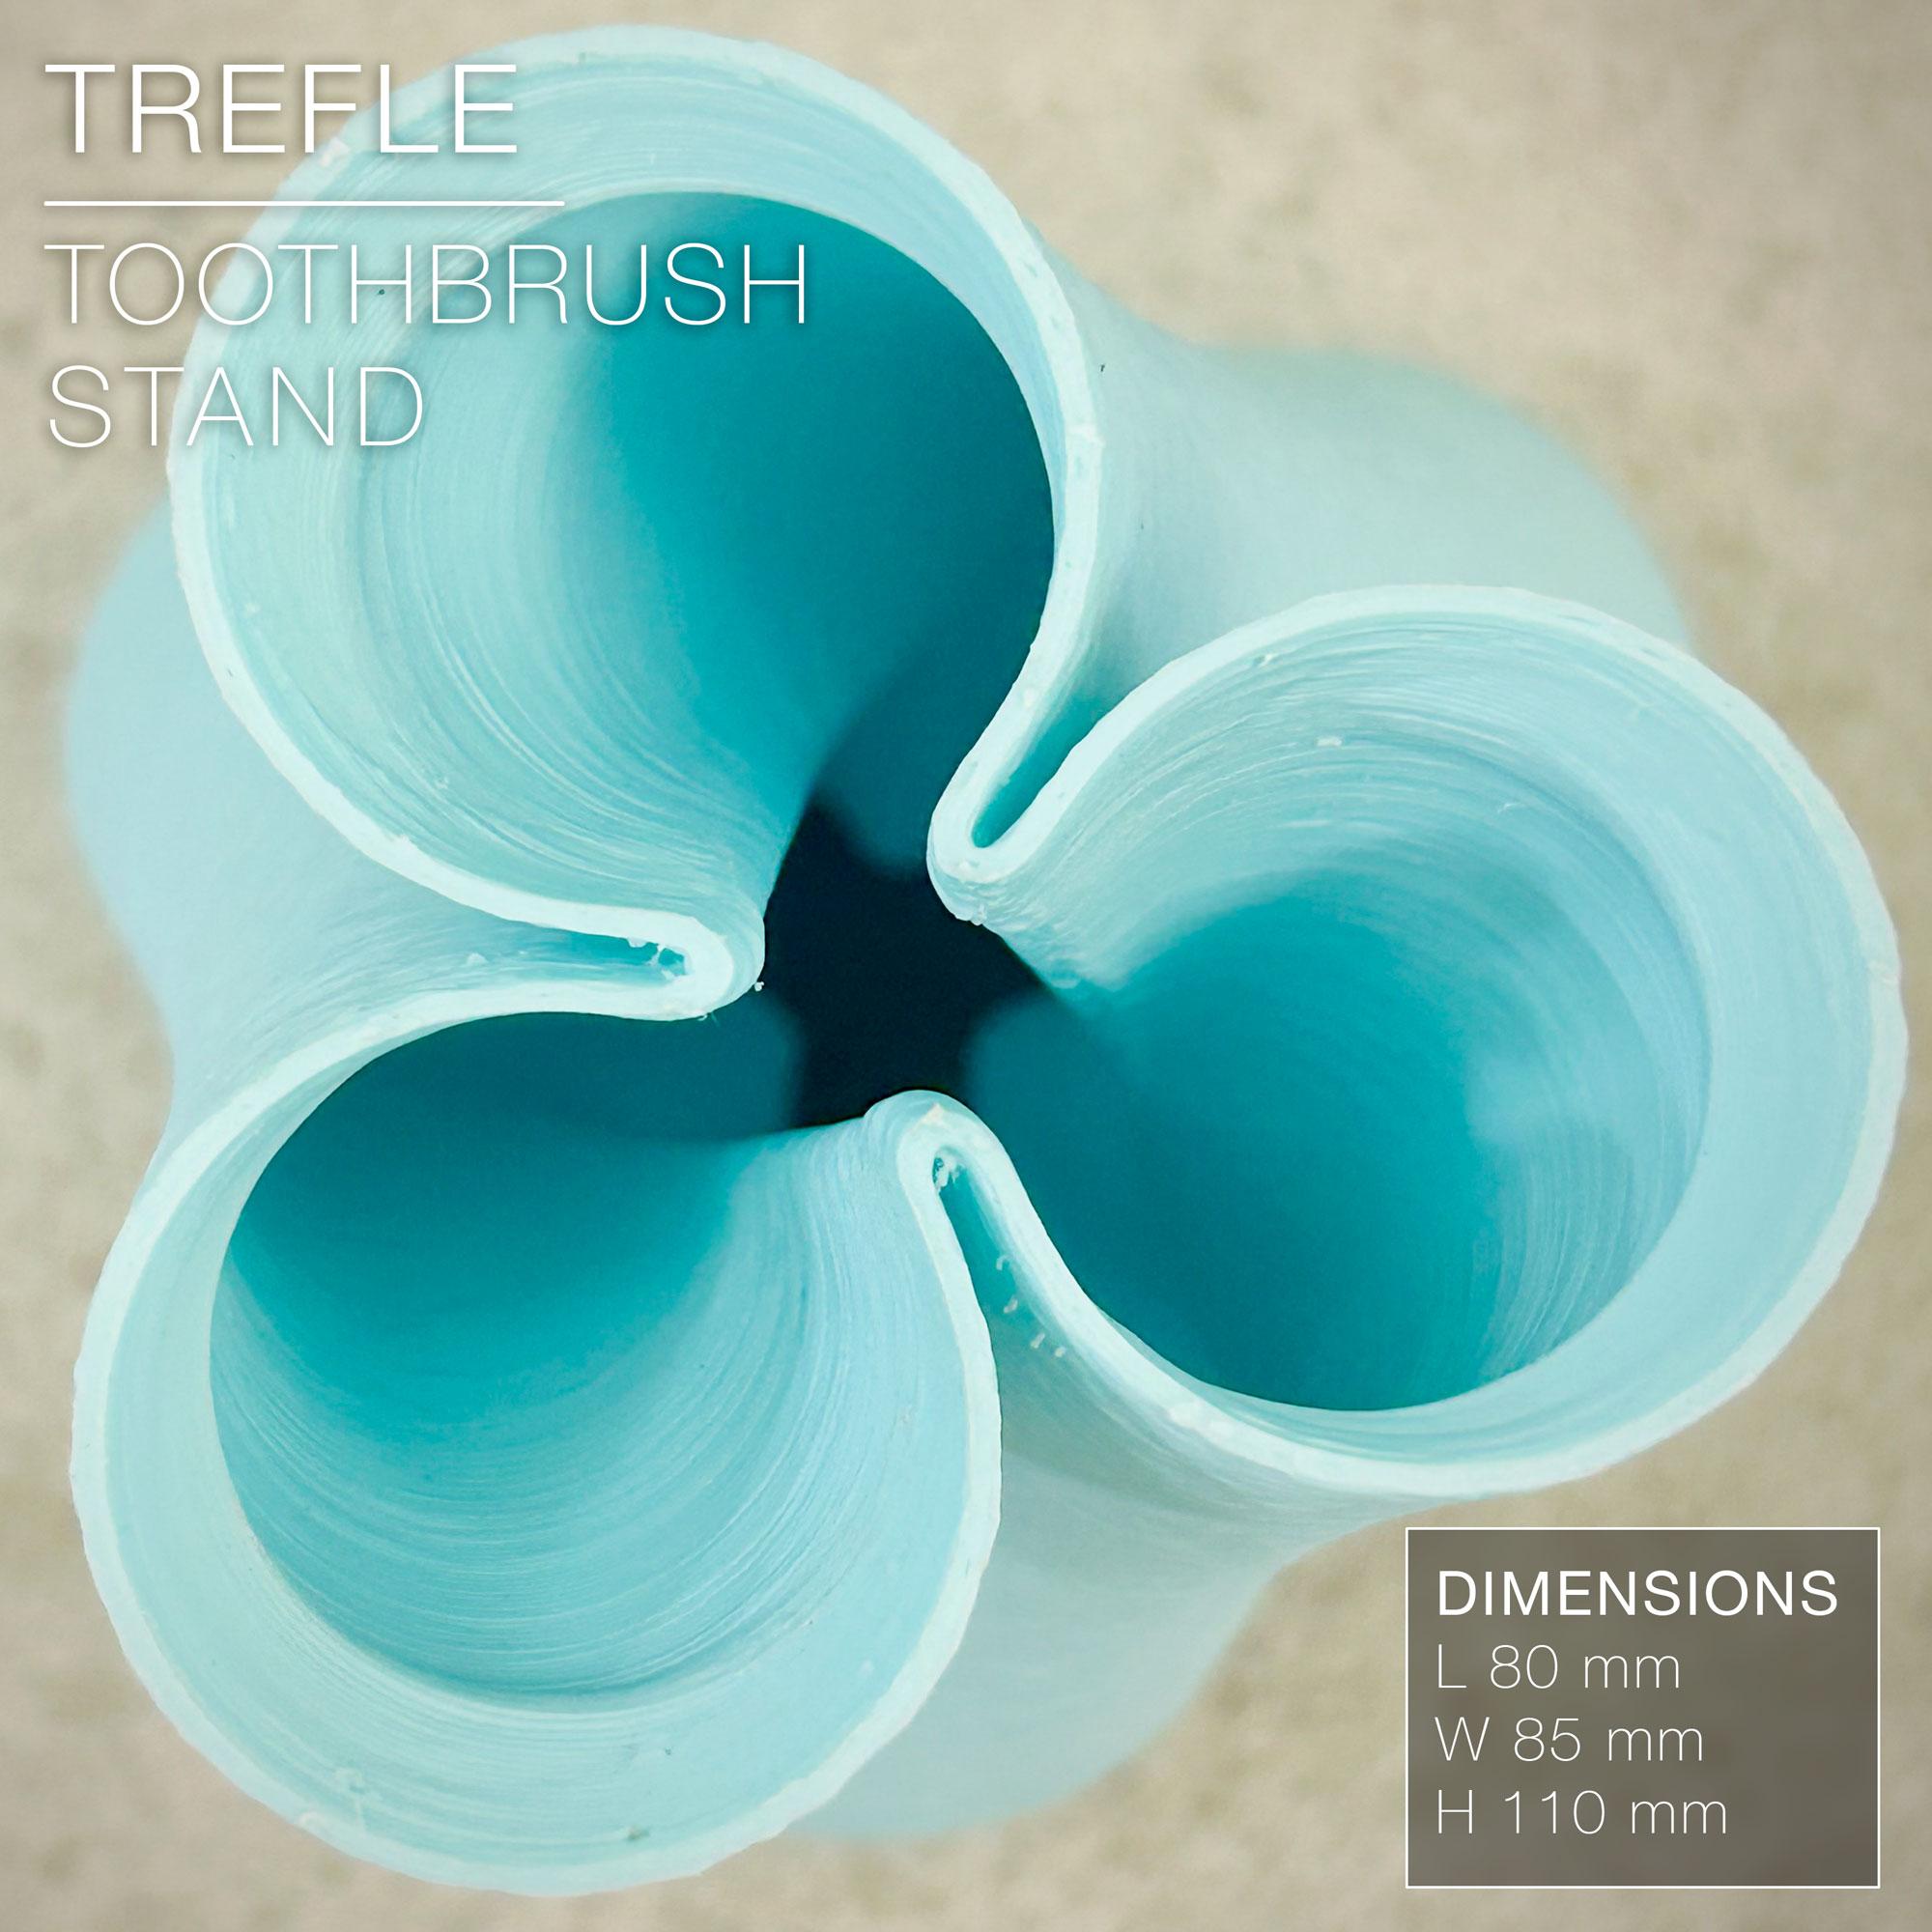 TREFLE | Toothbrush stand 3d model